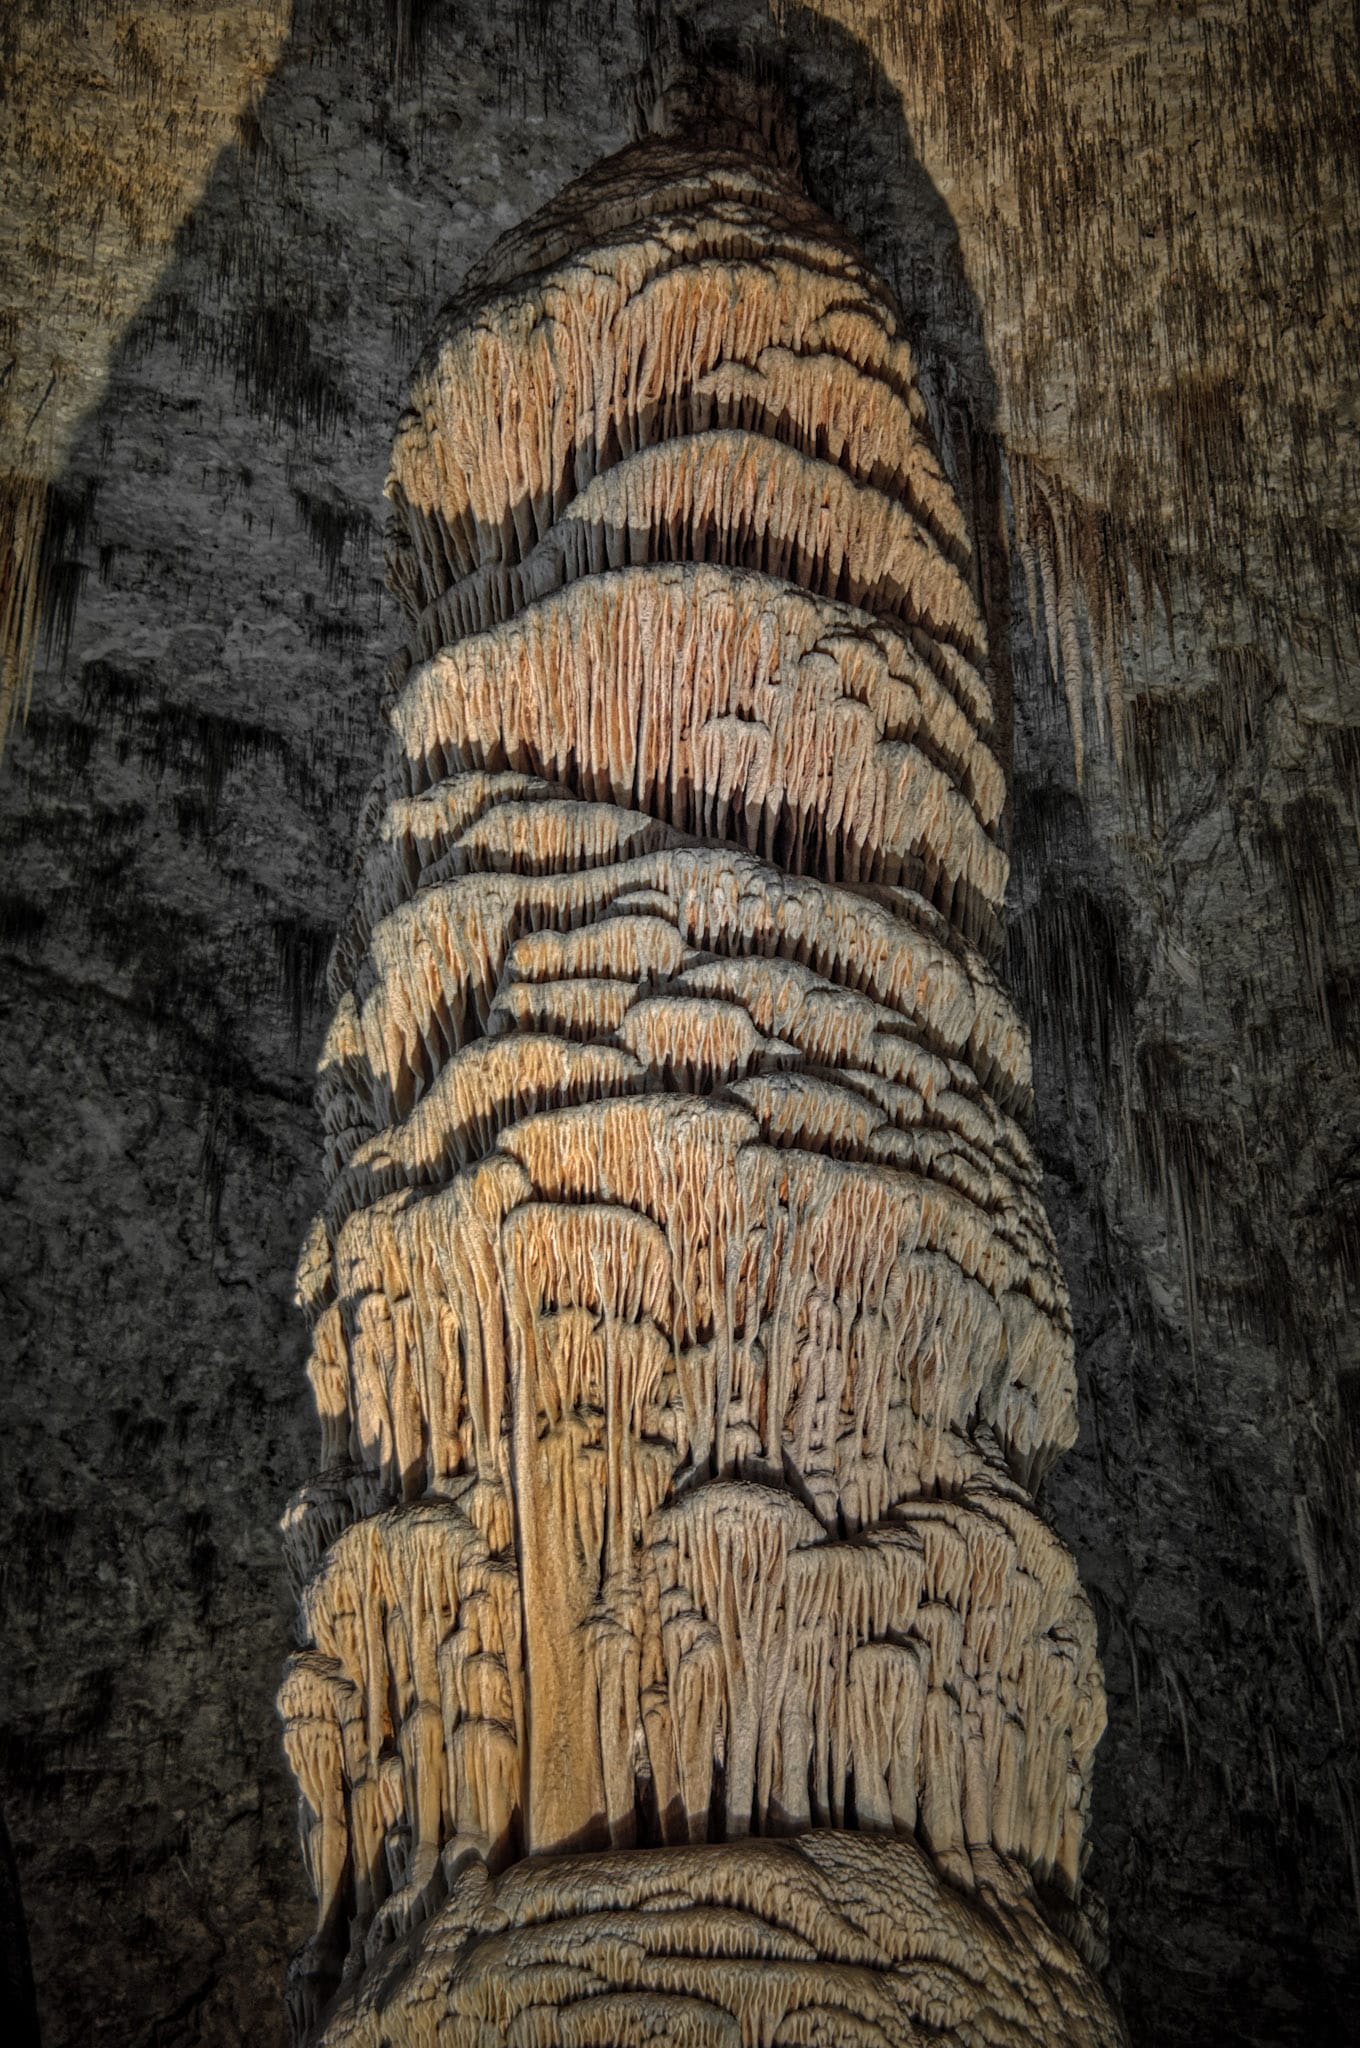 Decorated column in the Big Room area of Carlsbad Caverns National Park.